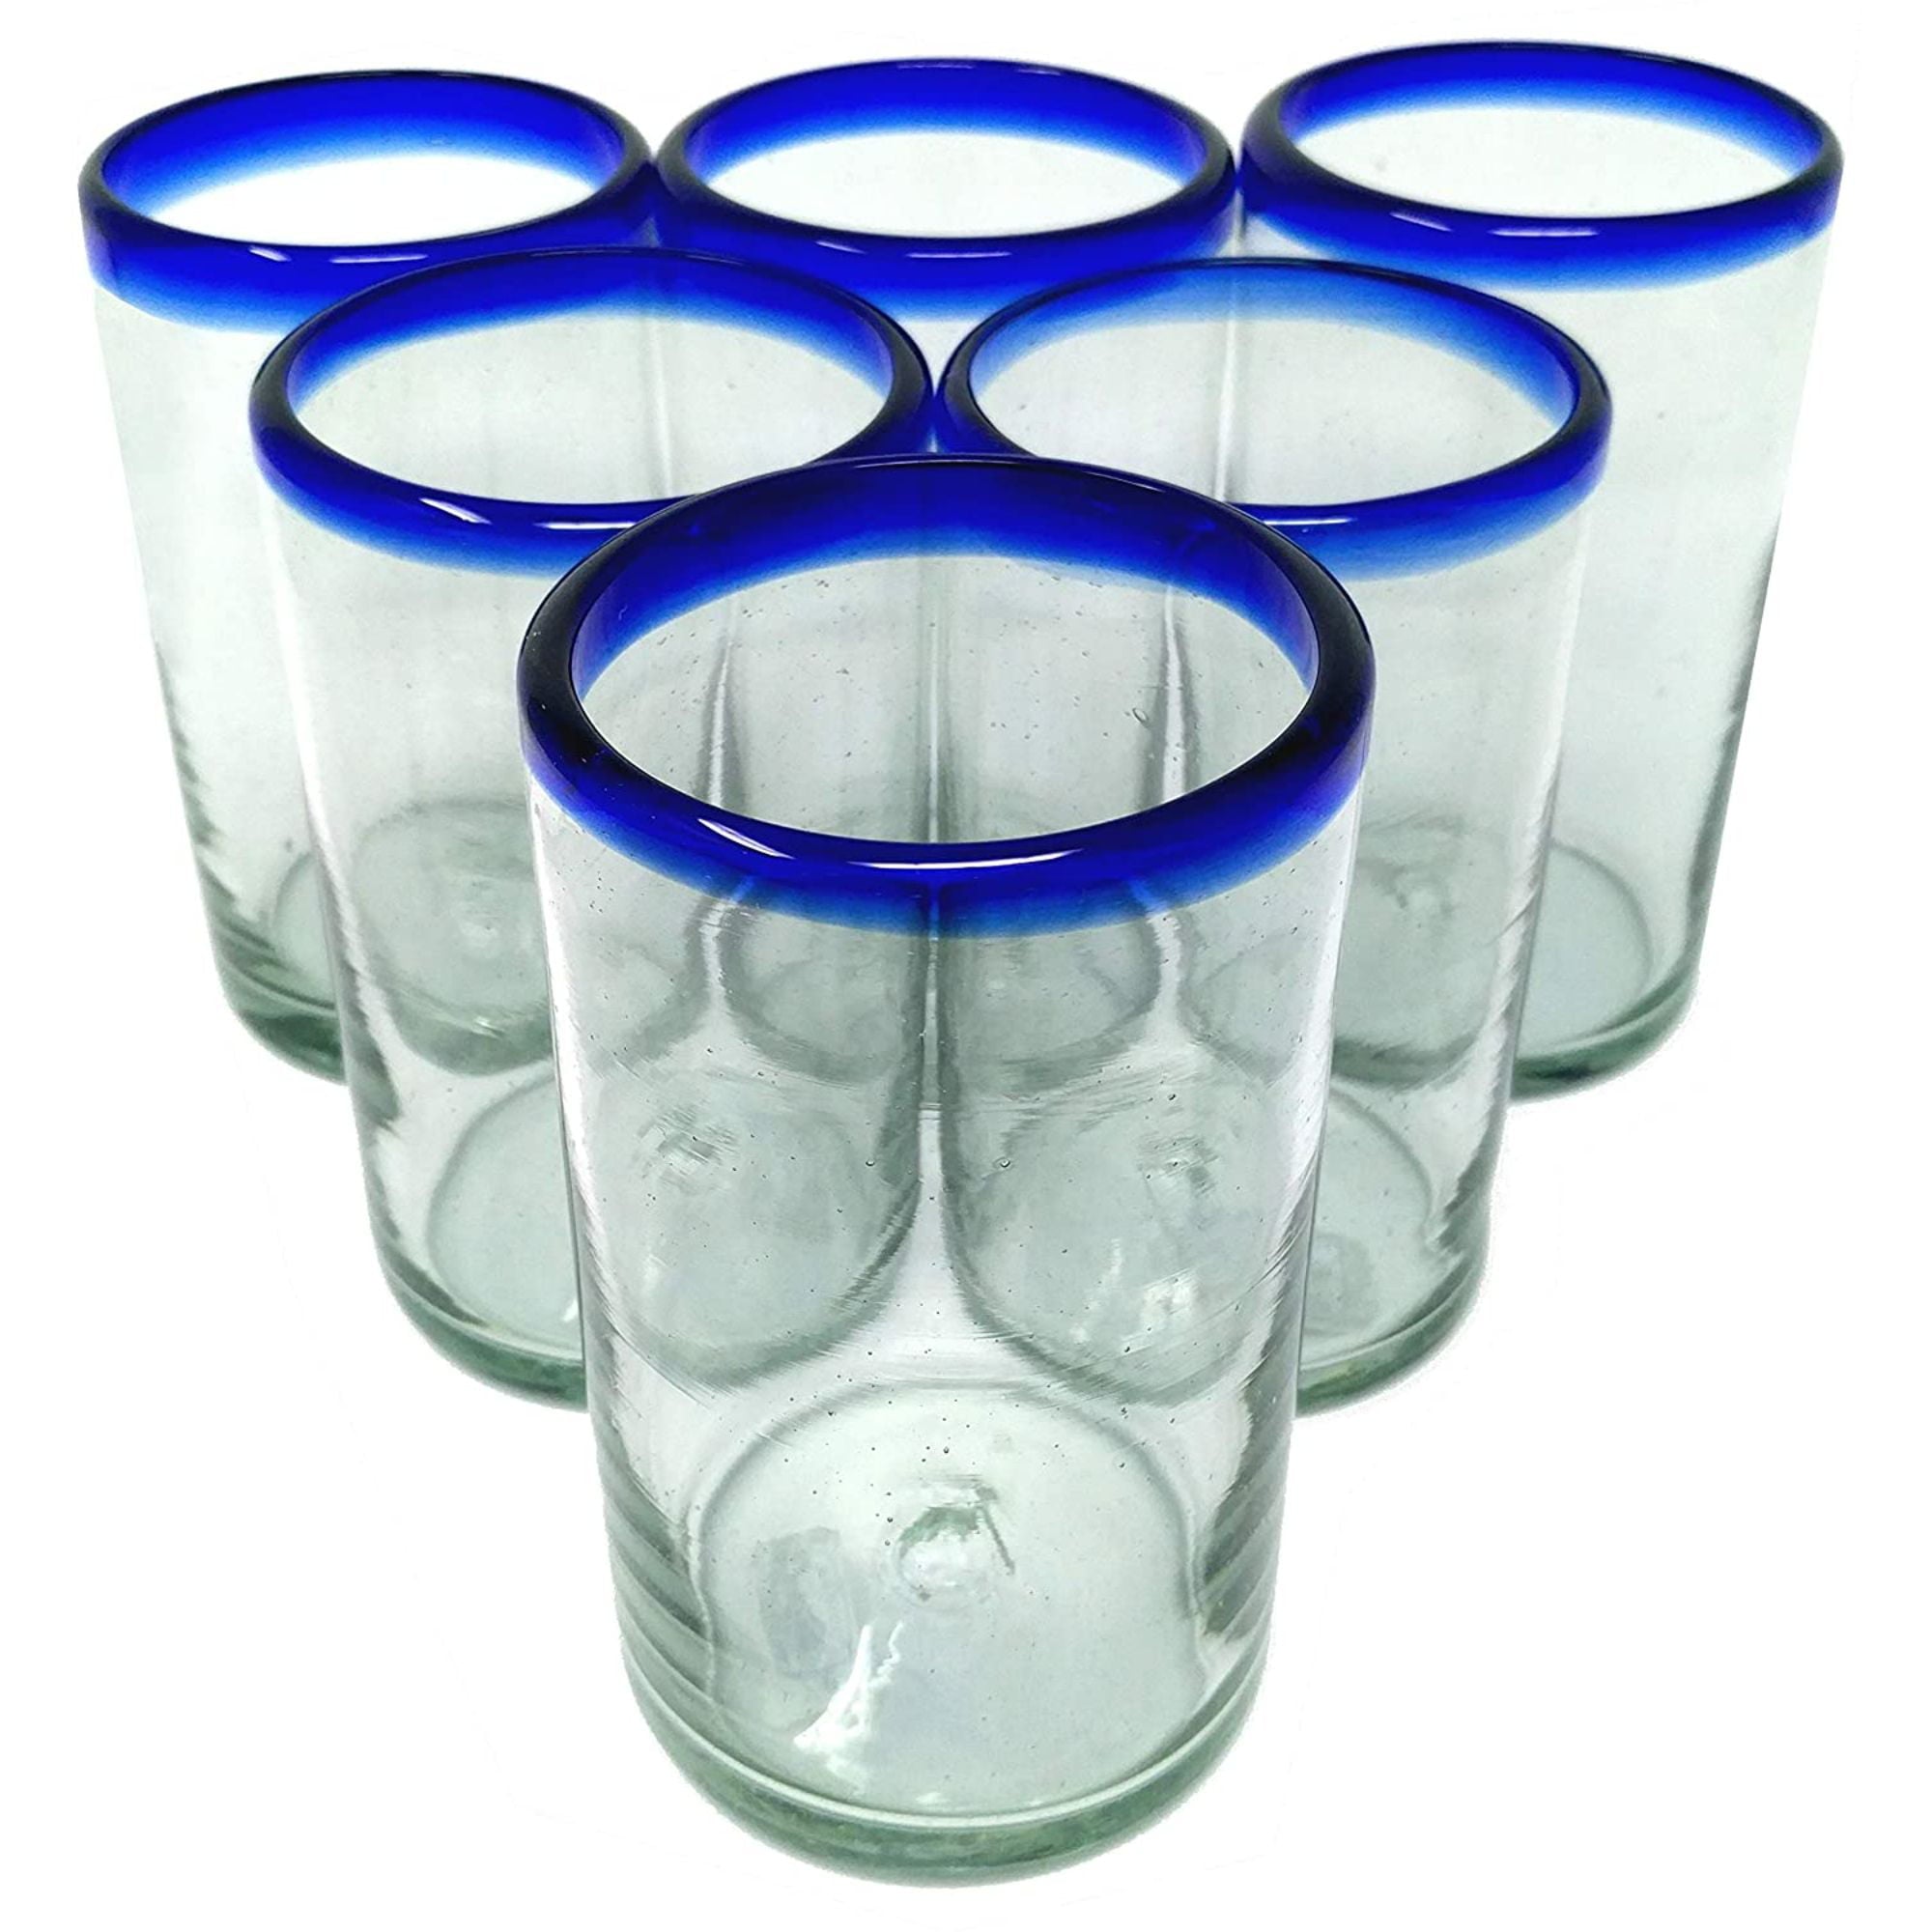 Hand Blown Drinking Glasses – Set of 6 Glasses with Cobalt Blue Rims 14 oz.